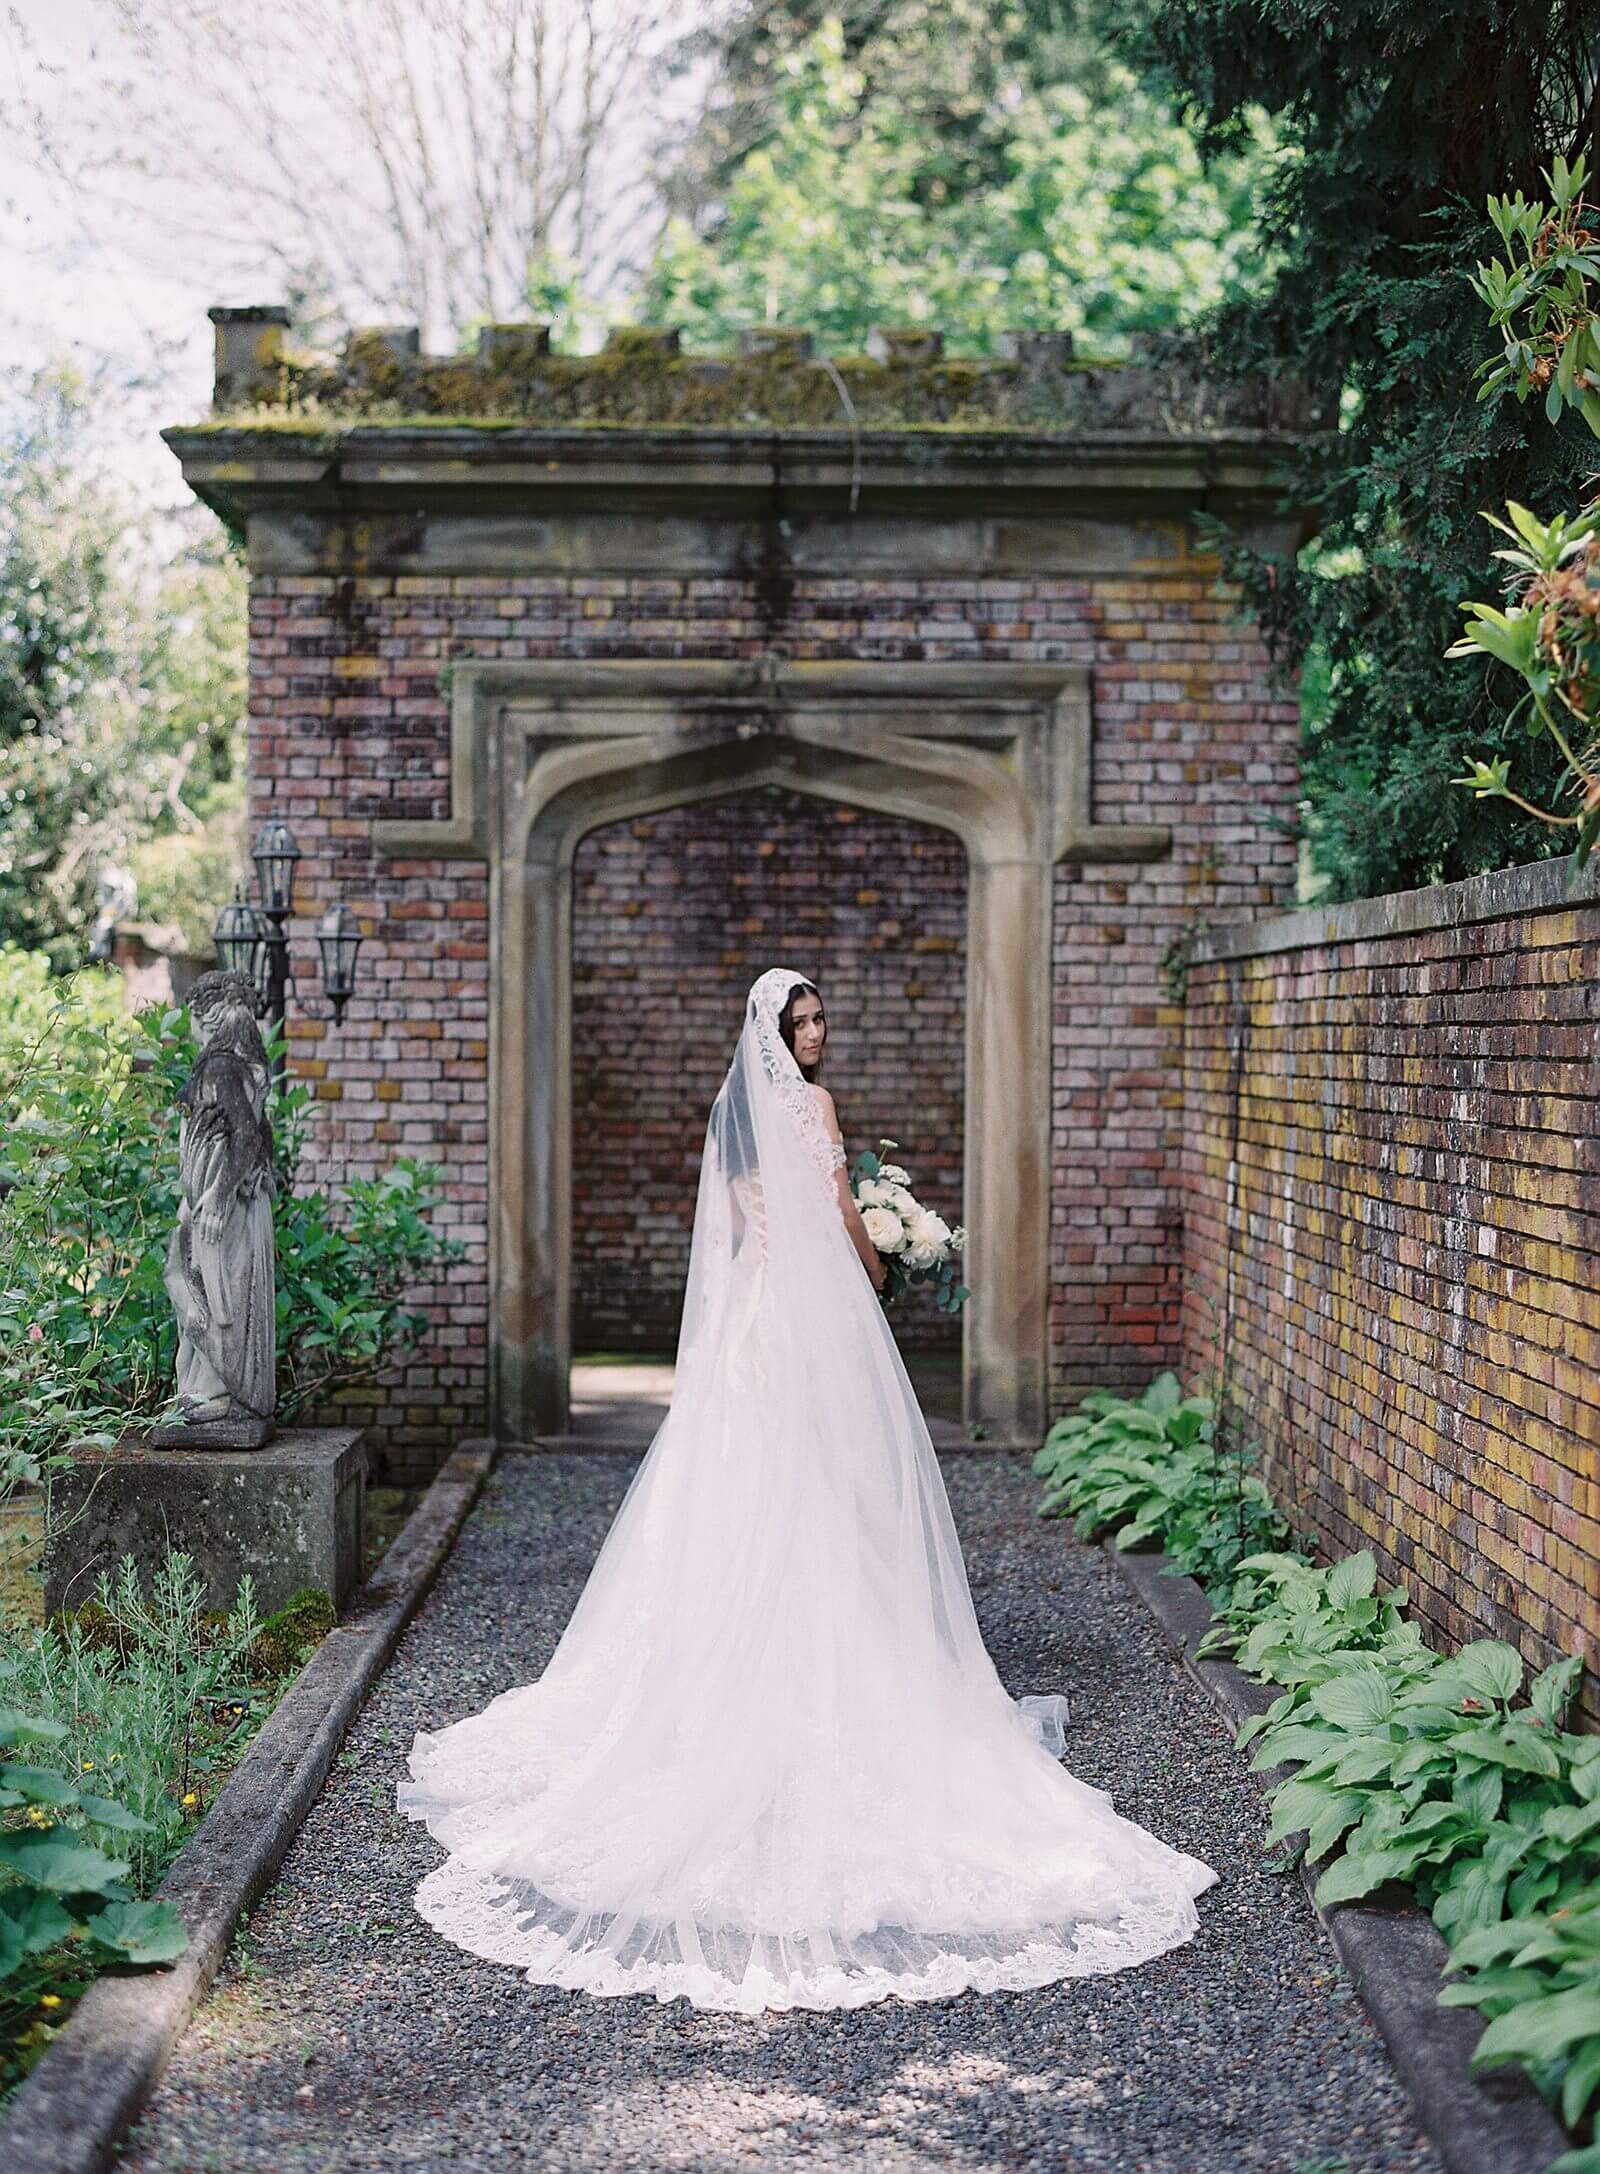 Bride with cathedral length lace veil from Girl and a Serious Dream outside at Thornewood Castle - Jacqueline Benét Photography